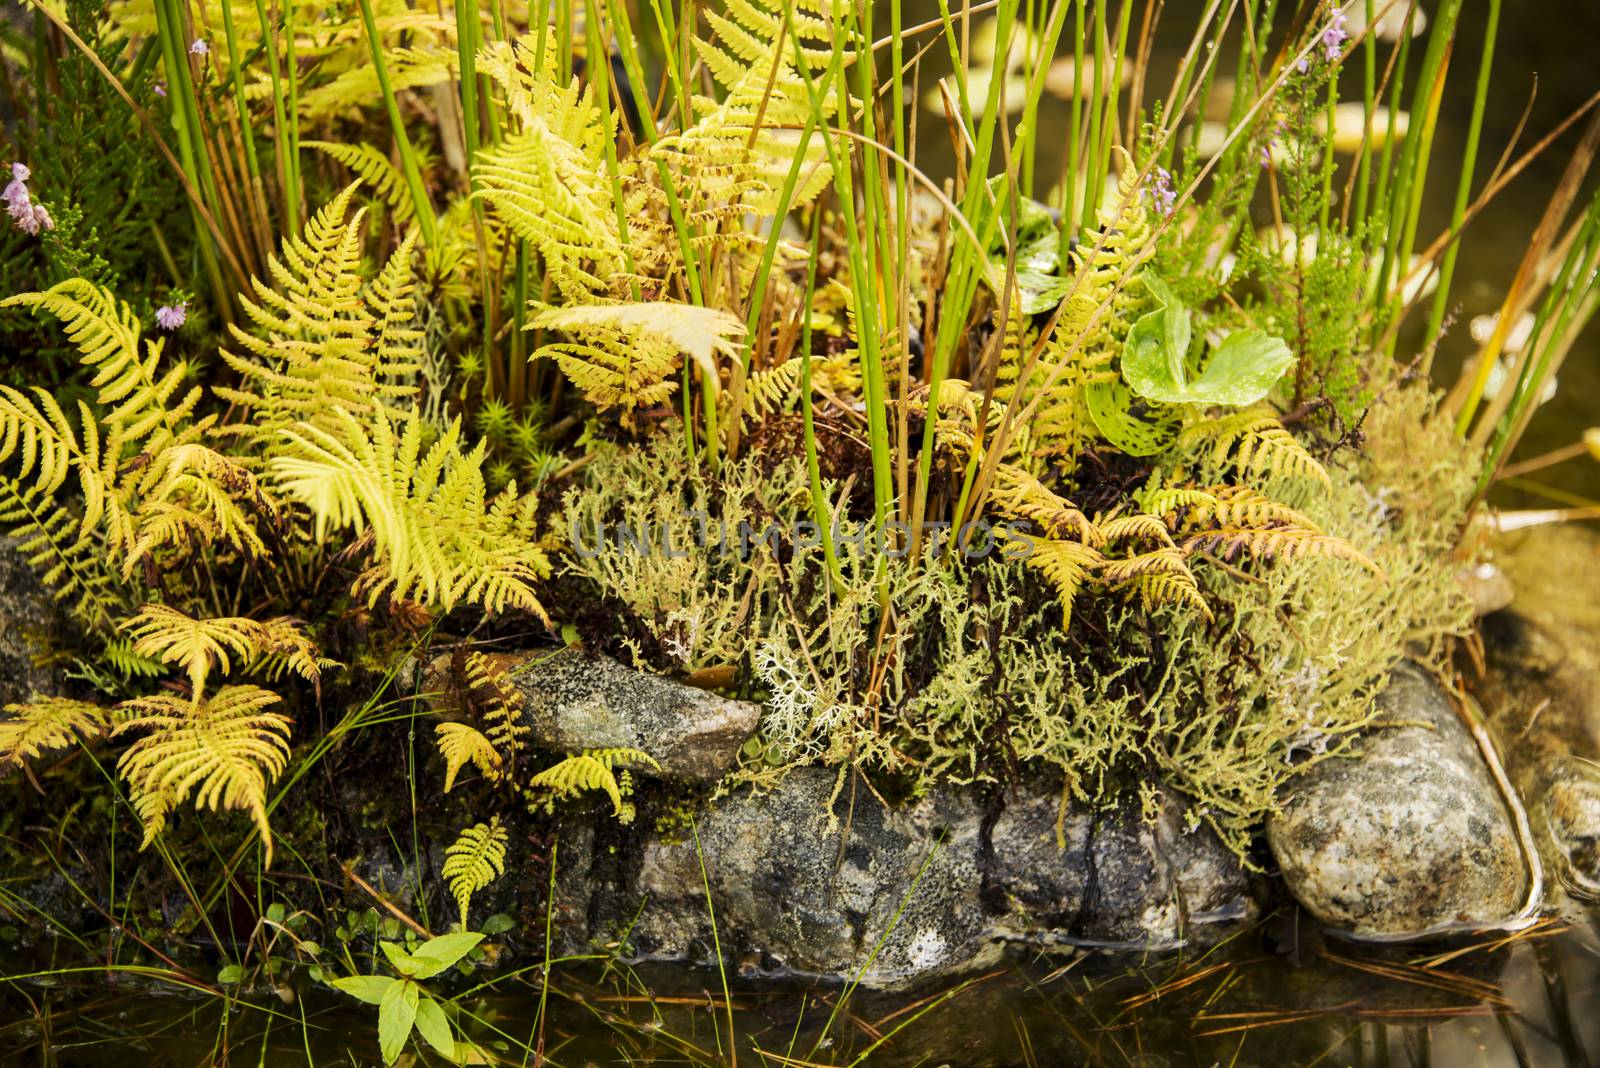 Vegetation by the pond with ferns, moss, reed and rocks